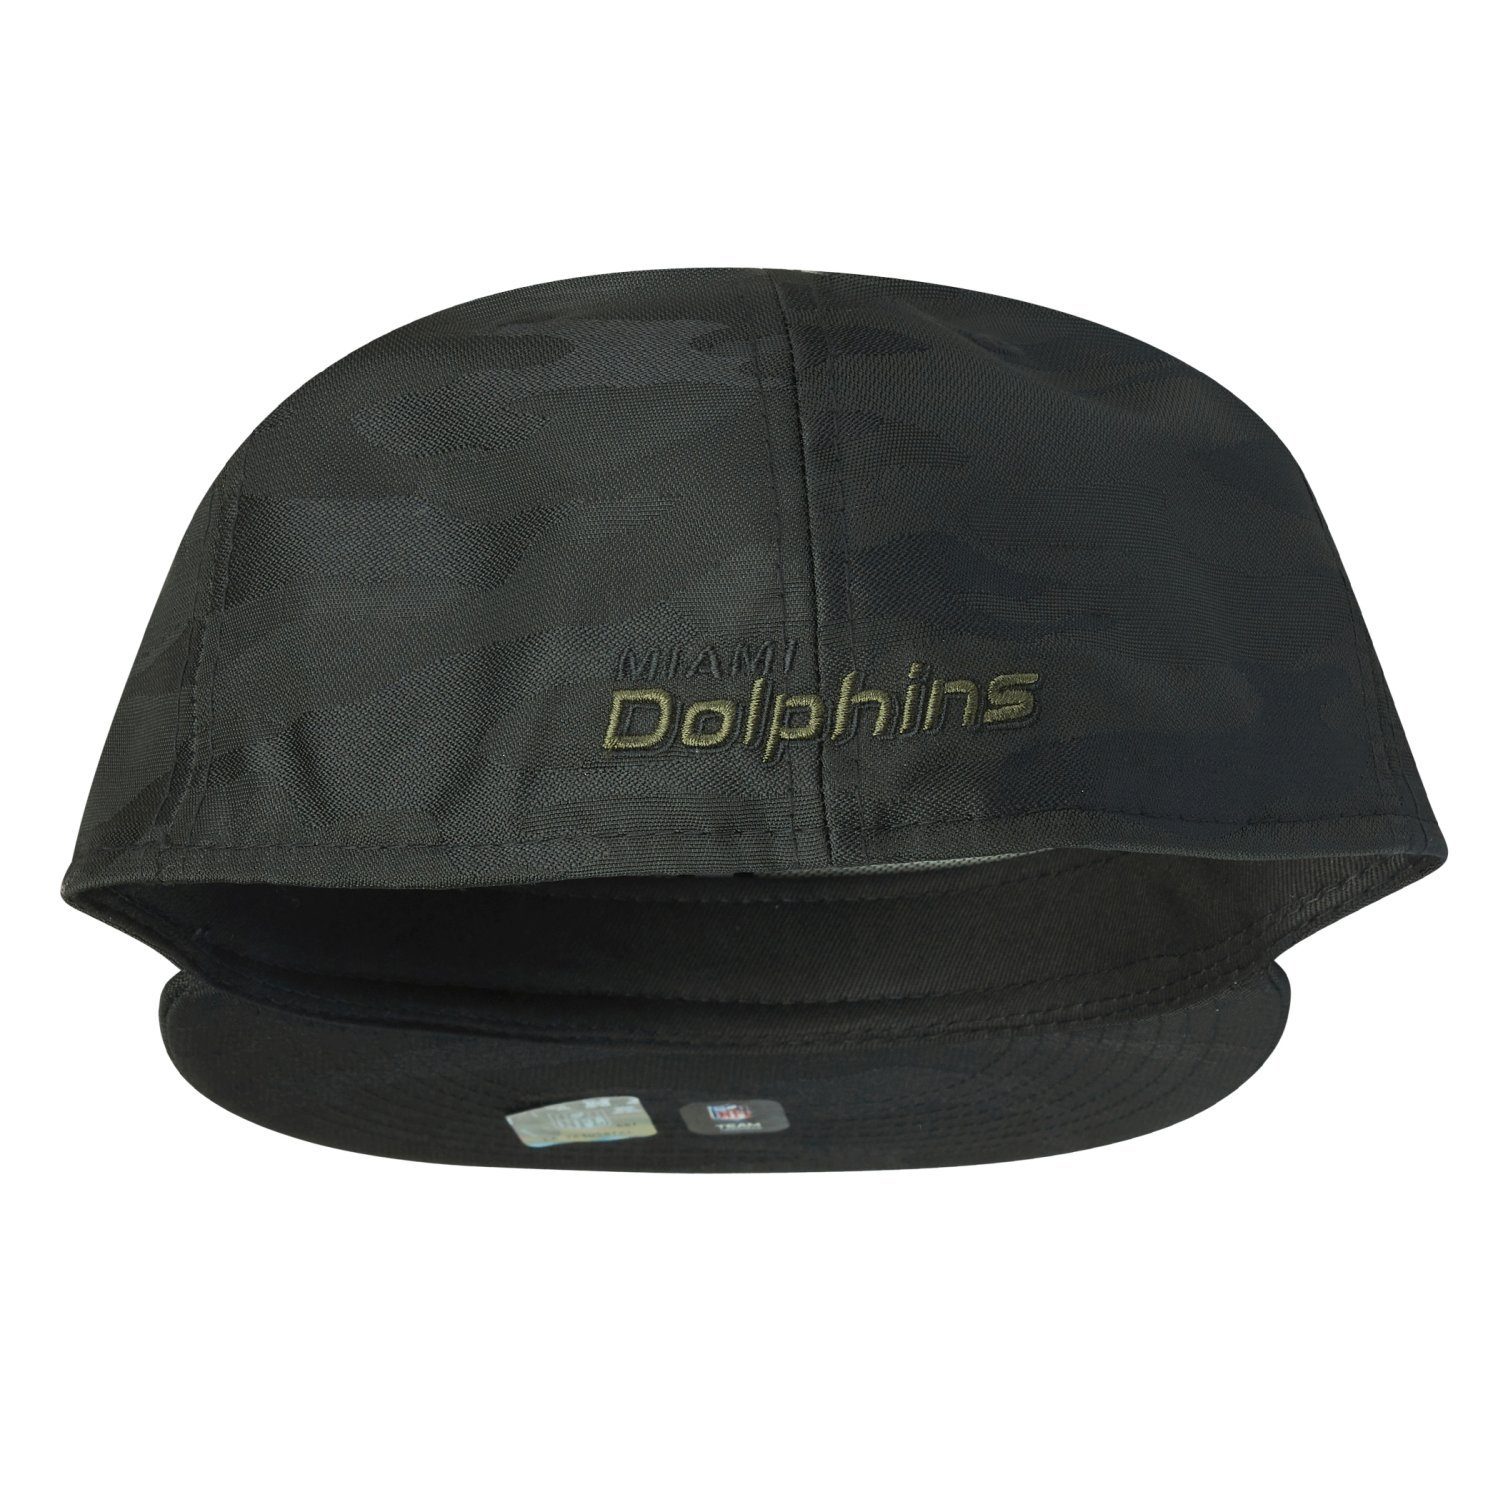 New Era Fitted Cap TEAMS NFL Dolphins 59Fifty Miami alpine